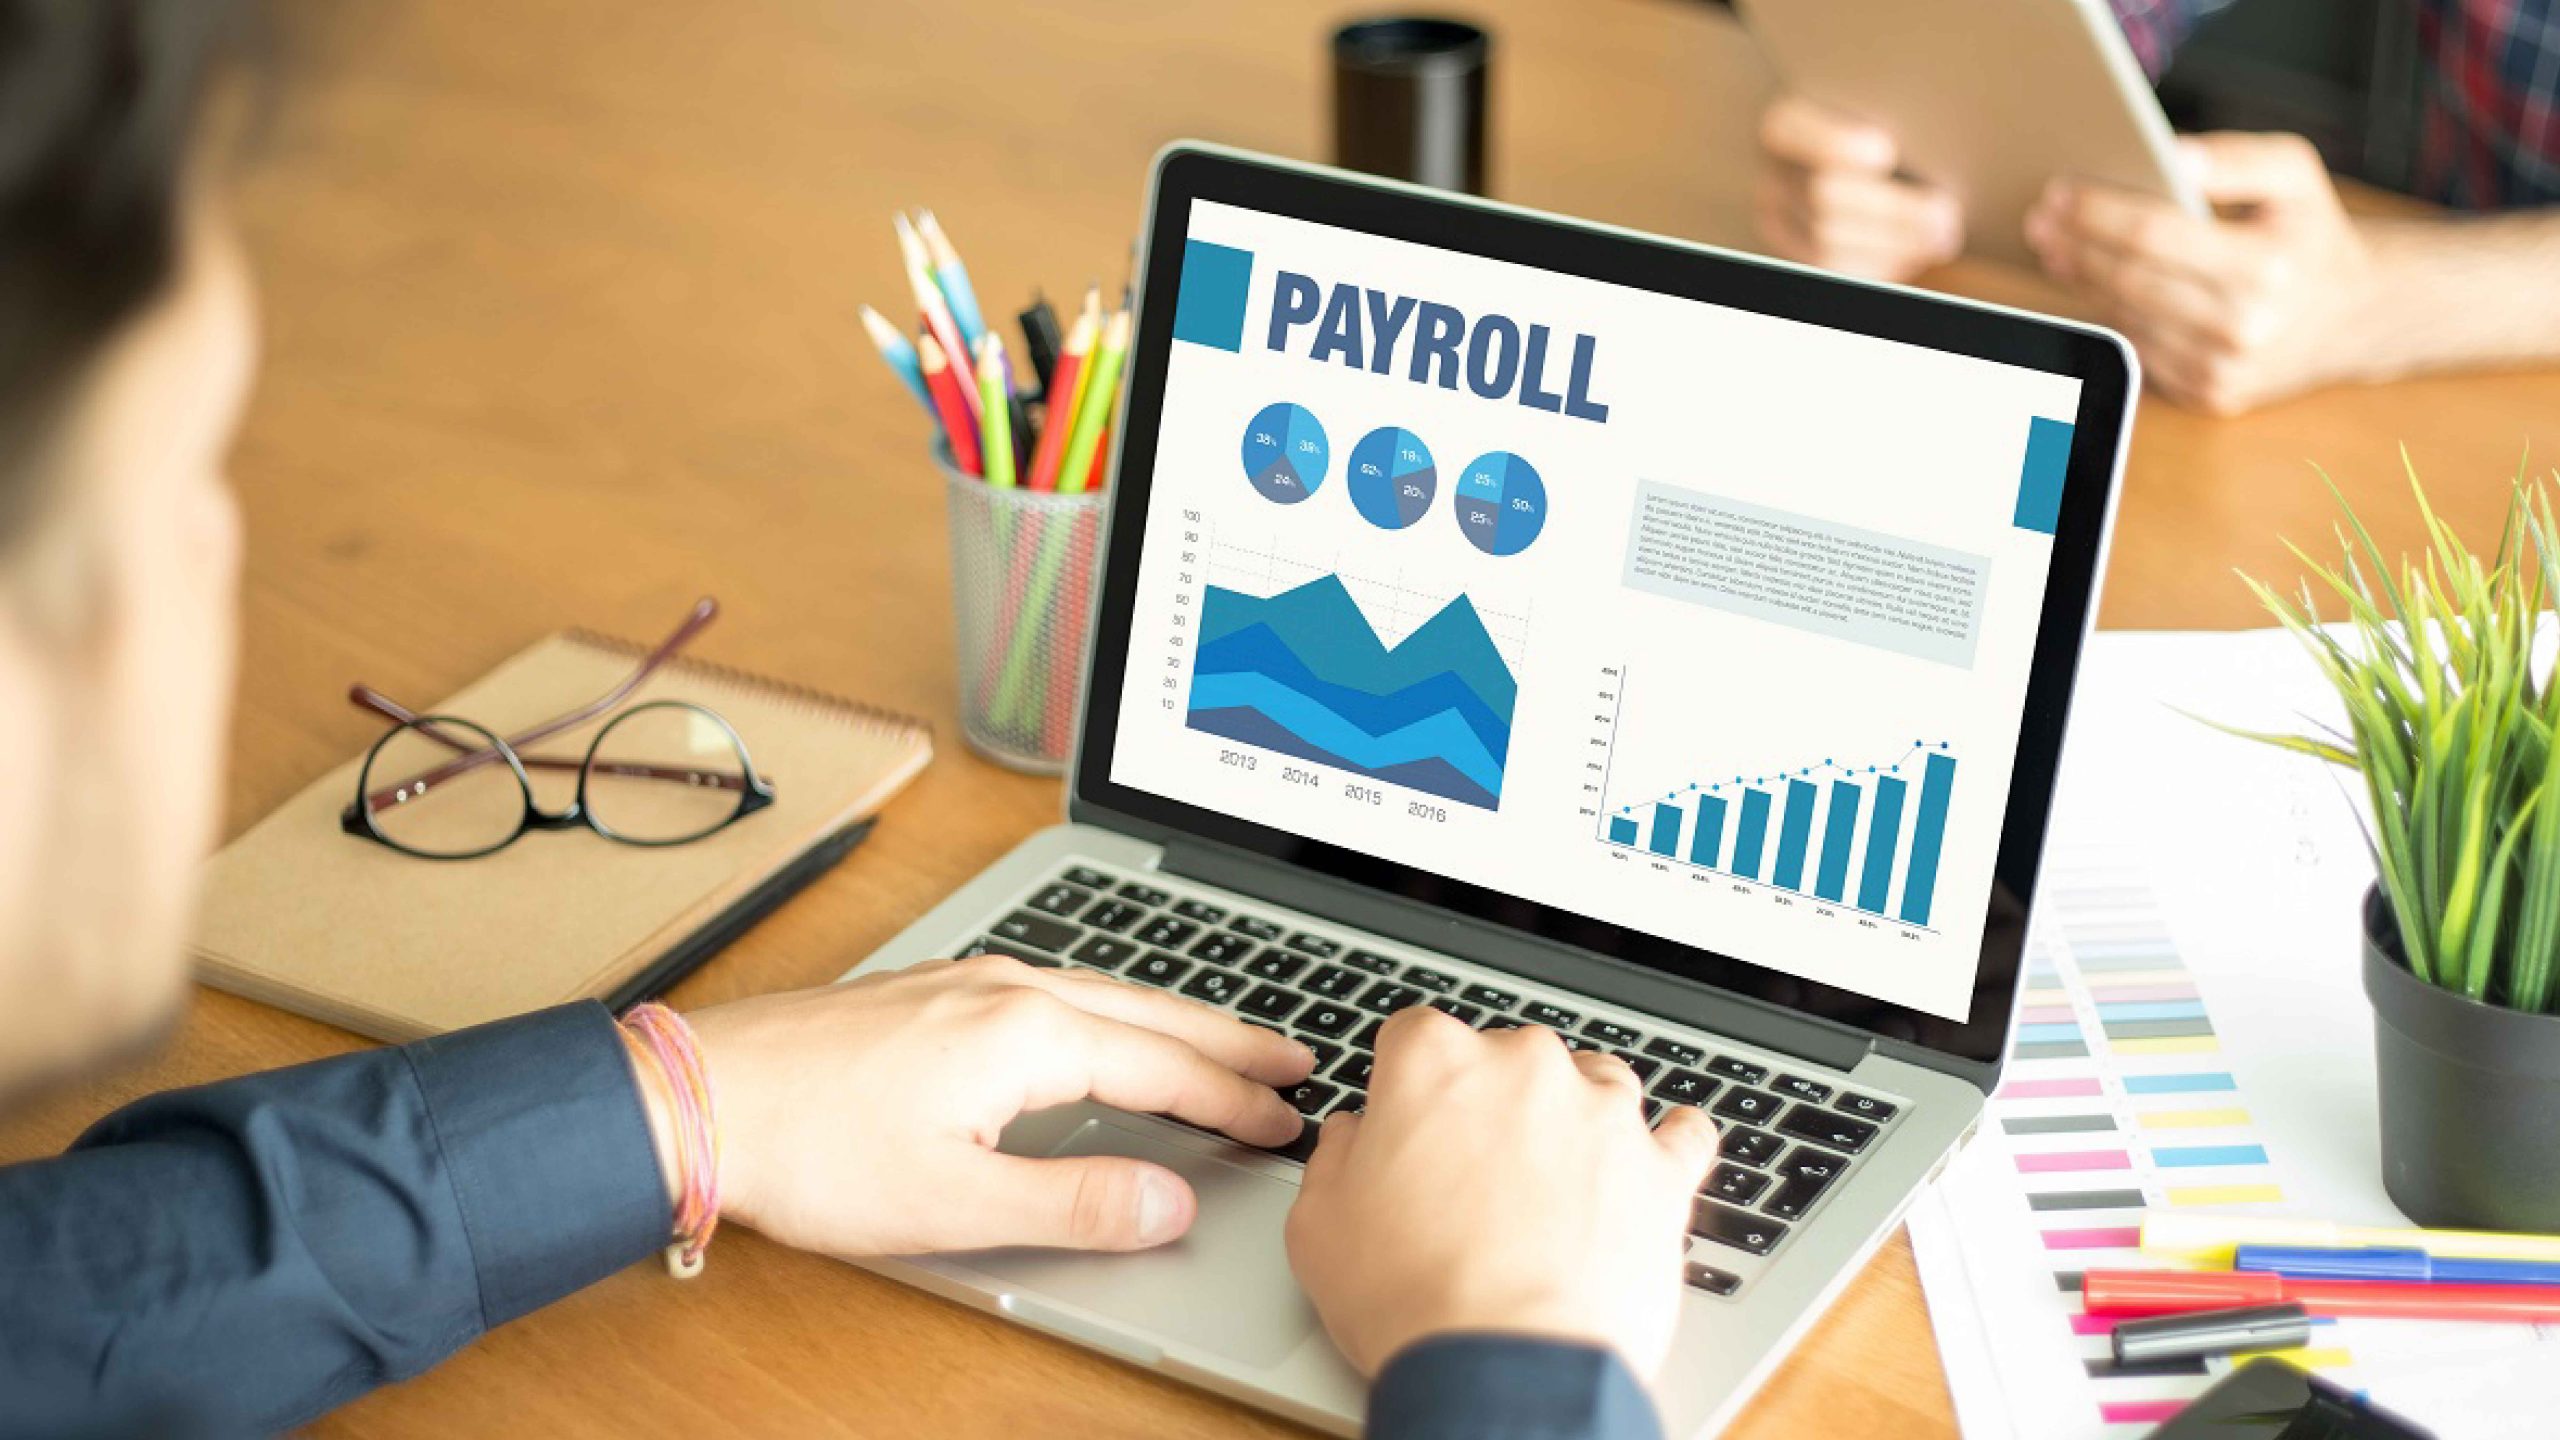 Advanced in Payroll Management